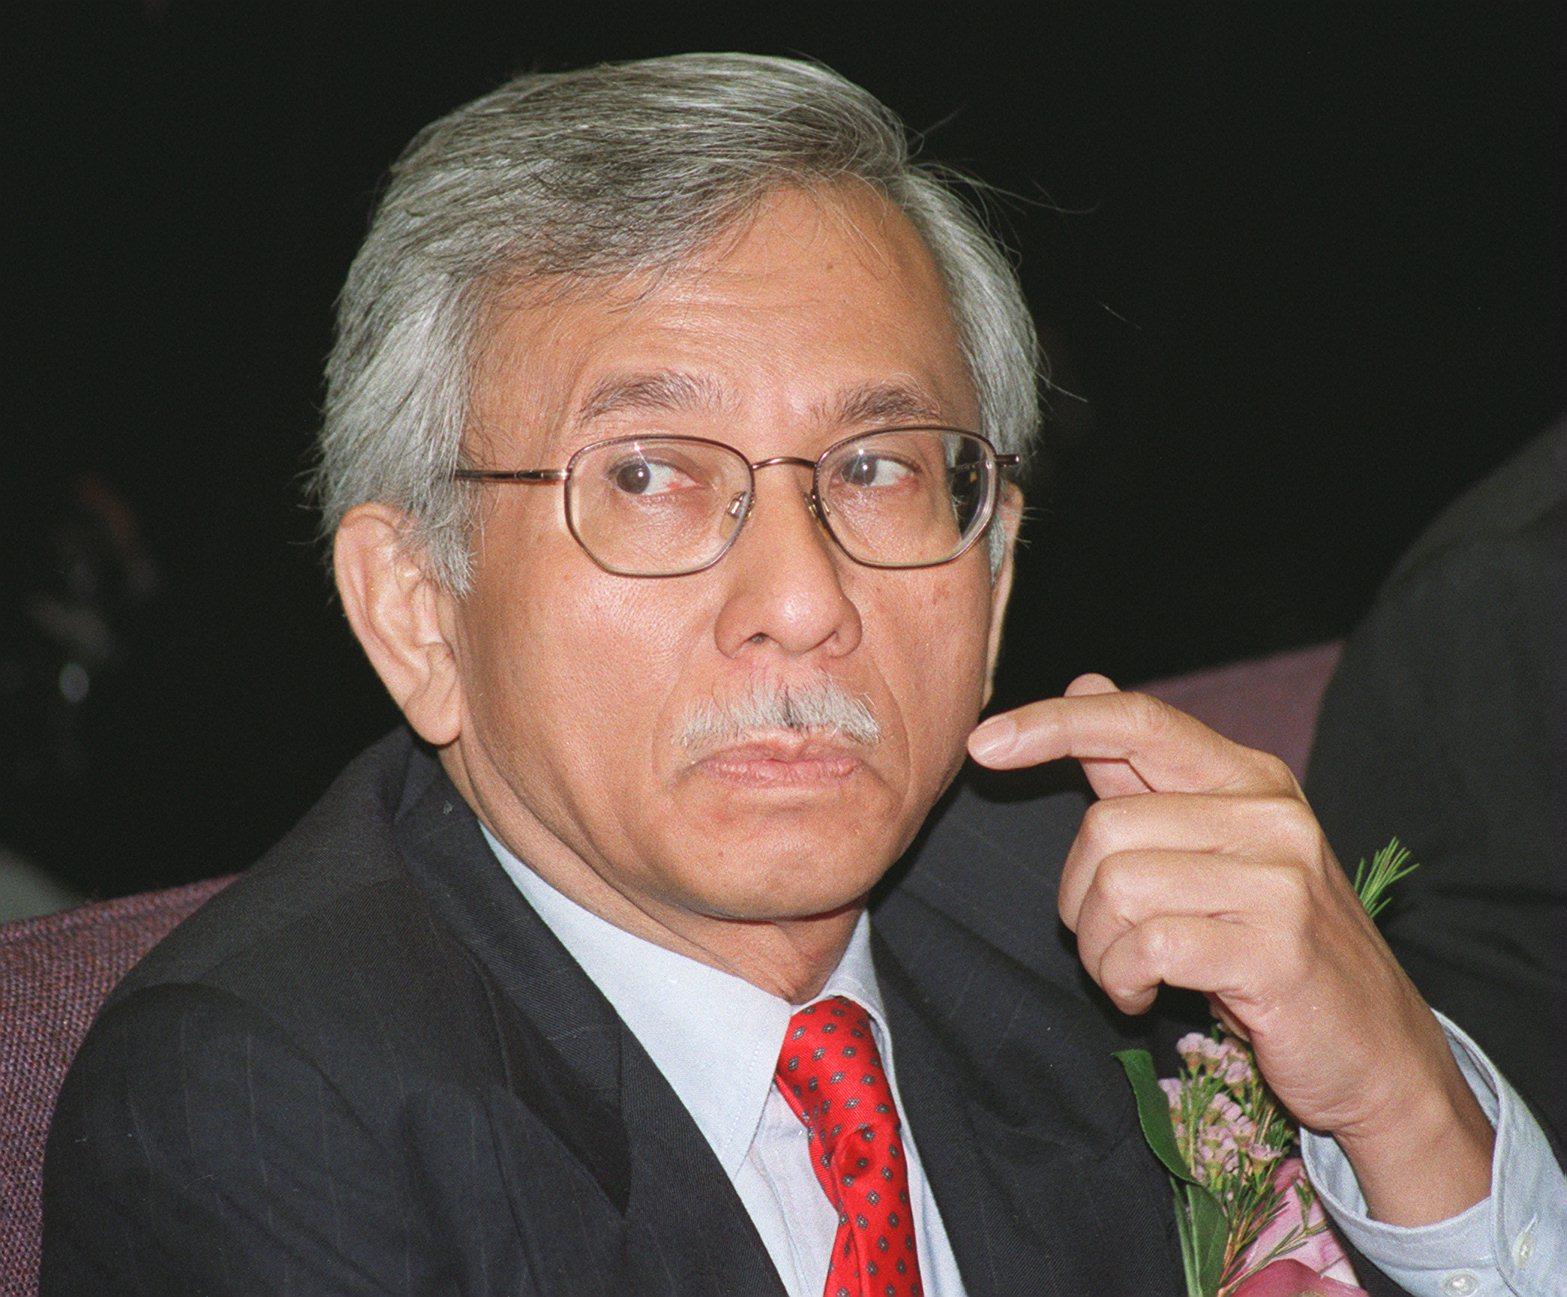 Malaysia’s former finance minister Daim Zainuddin said he stood to gain more wealth had he not joined politics, amid a probe by the country’s anti-corruption board. Photo: AP